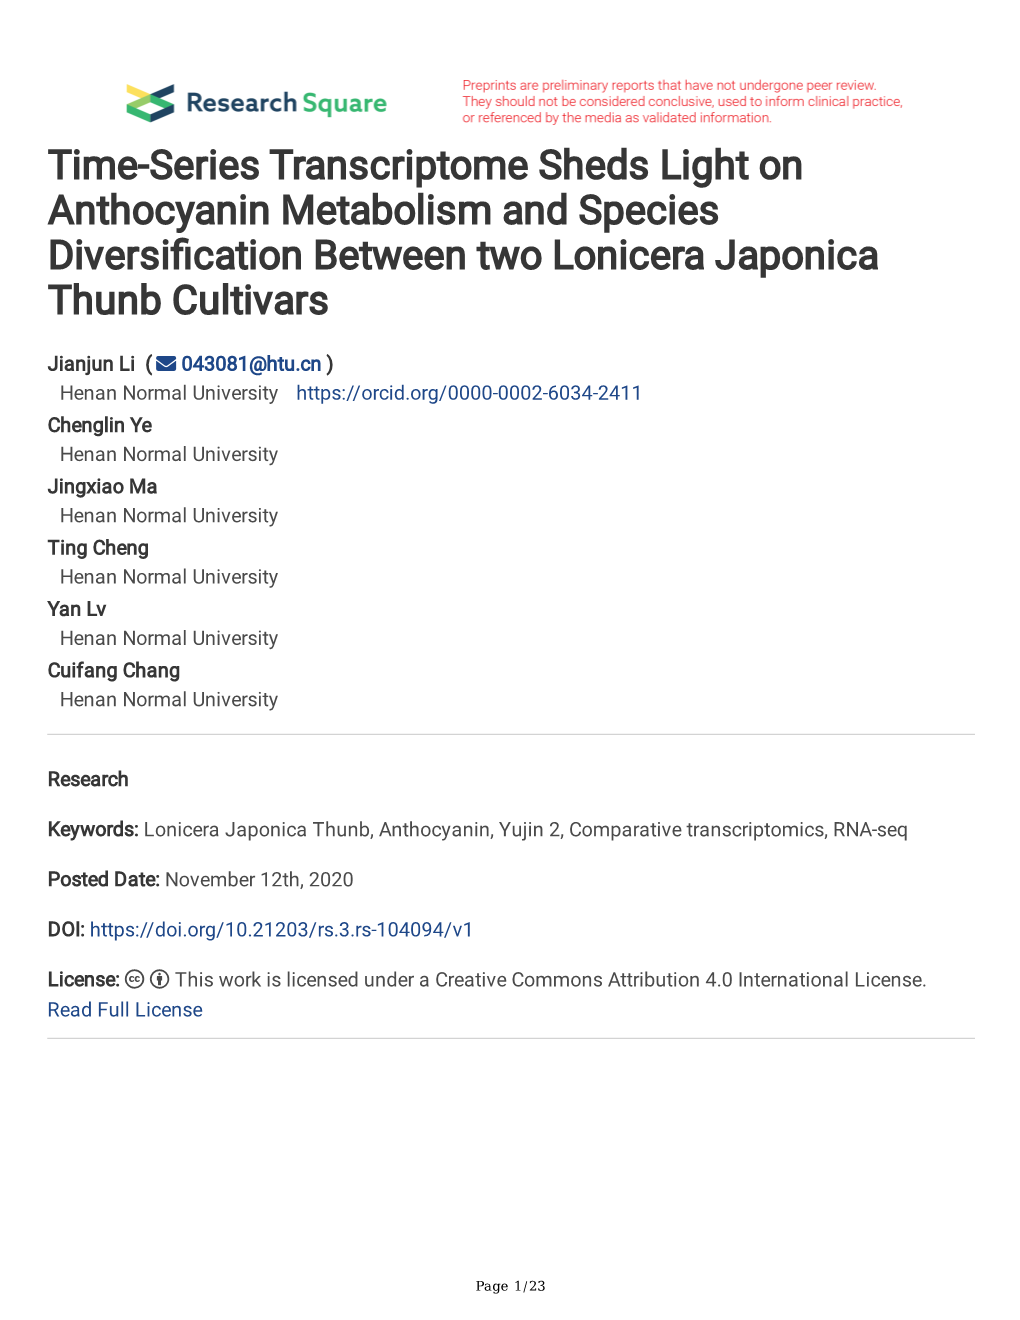 Time-Series Transcriptome Sheds Light on Anthocyanin Metabolism and Species Diversifcation Between Two Lonicera Japonica Thunb Cultivars